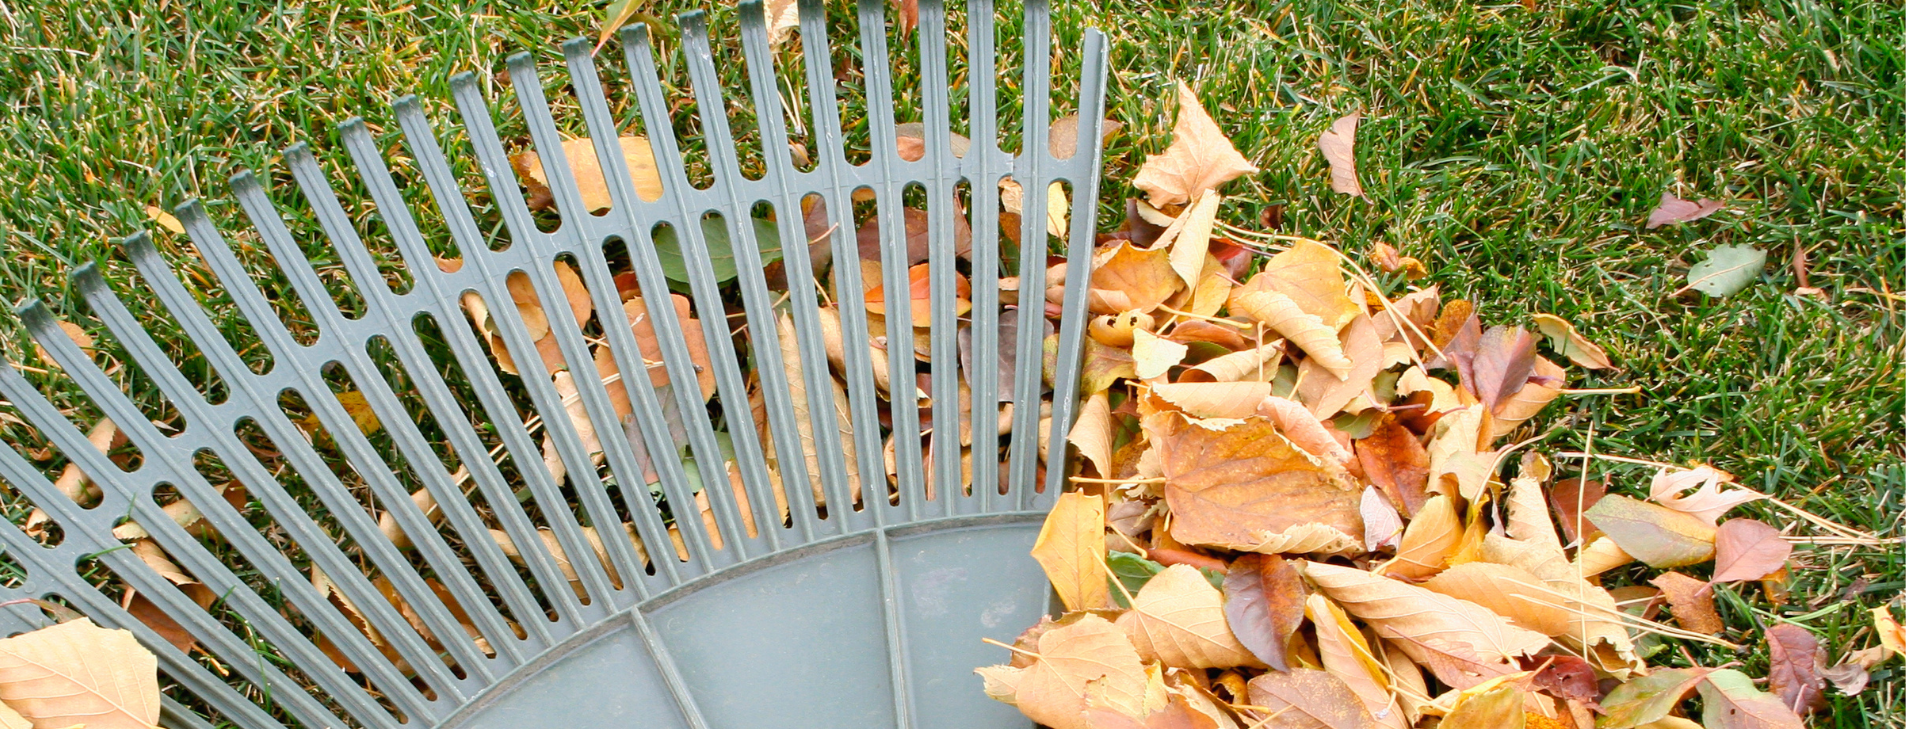 Curbside leaf cleanup we show up and get the leaves you pile at the curb. Don't wait on the scheduled city leaf collection to get your yard looking right. 